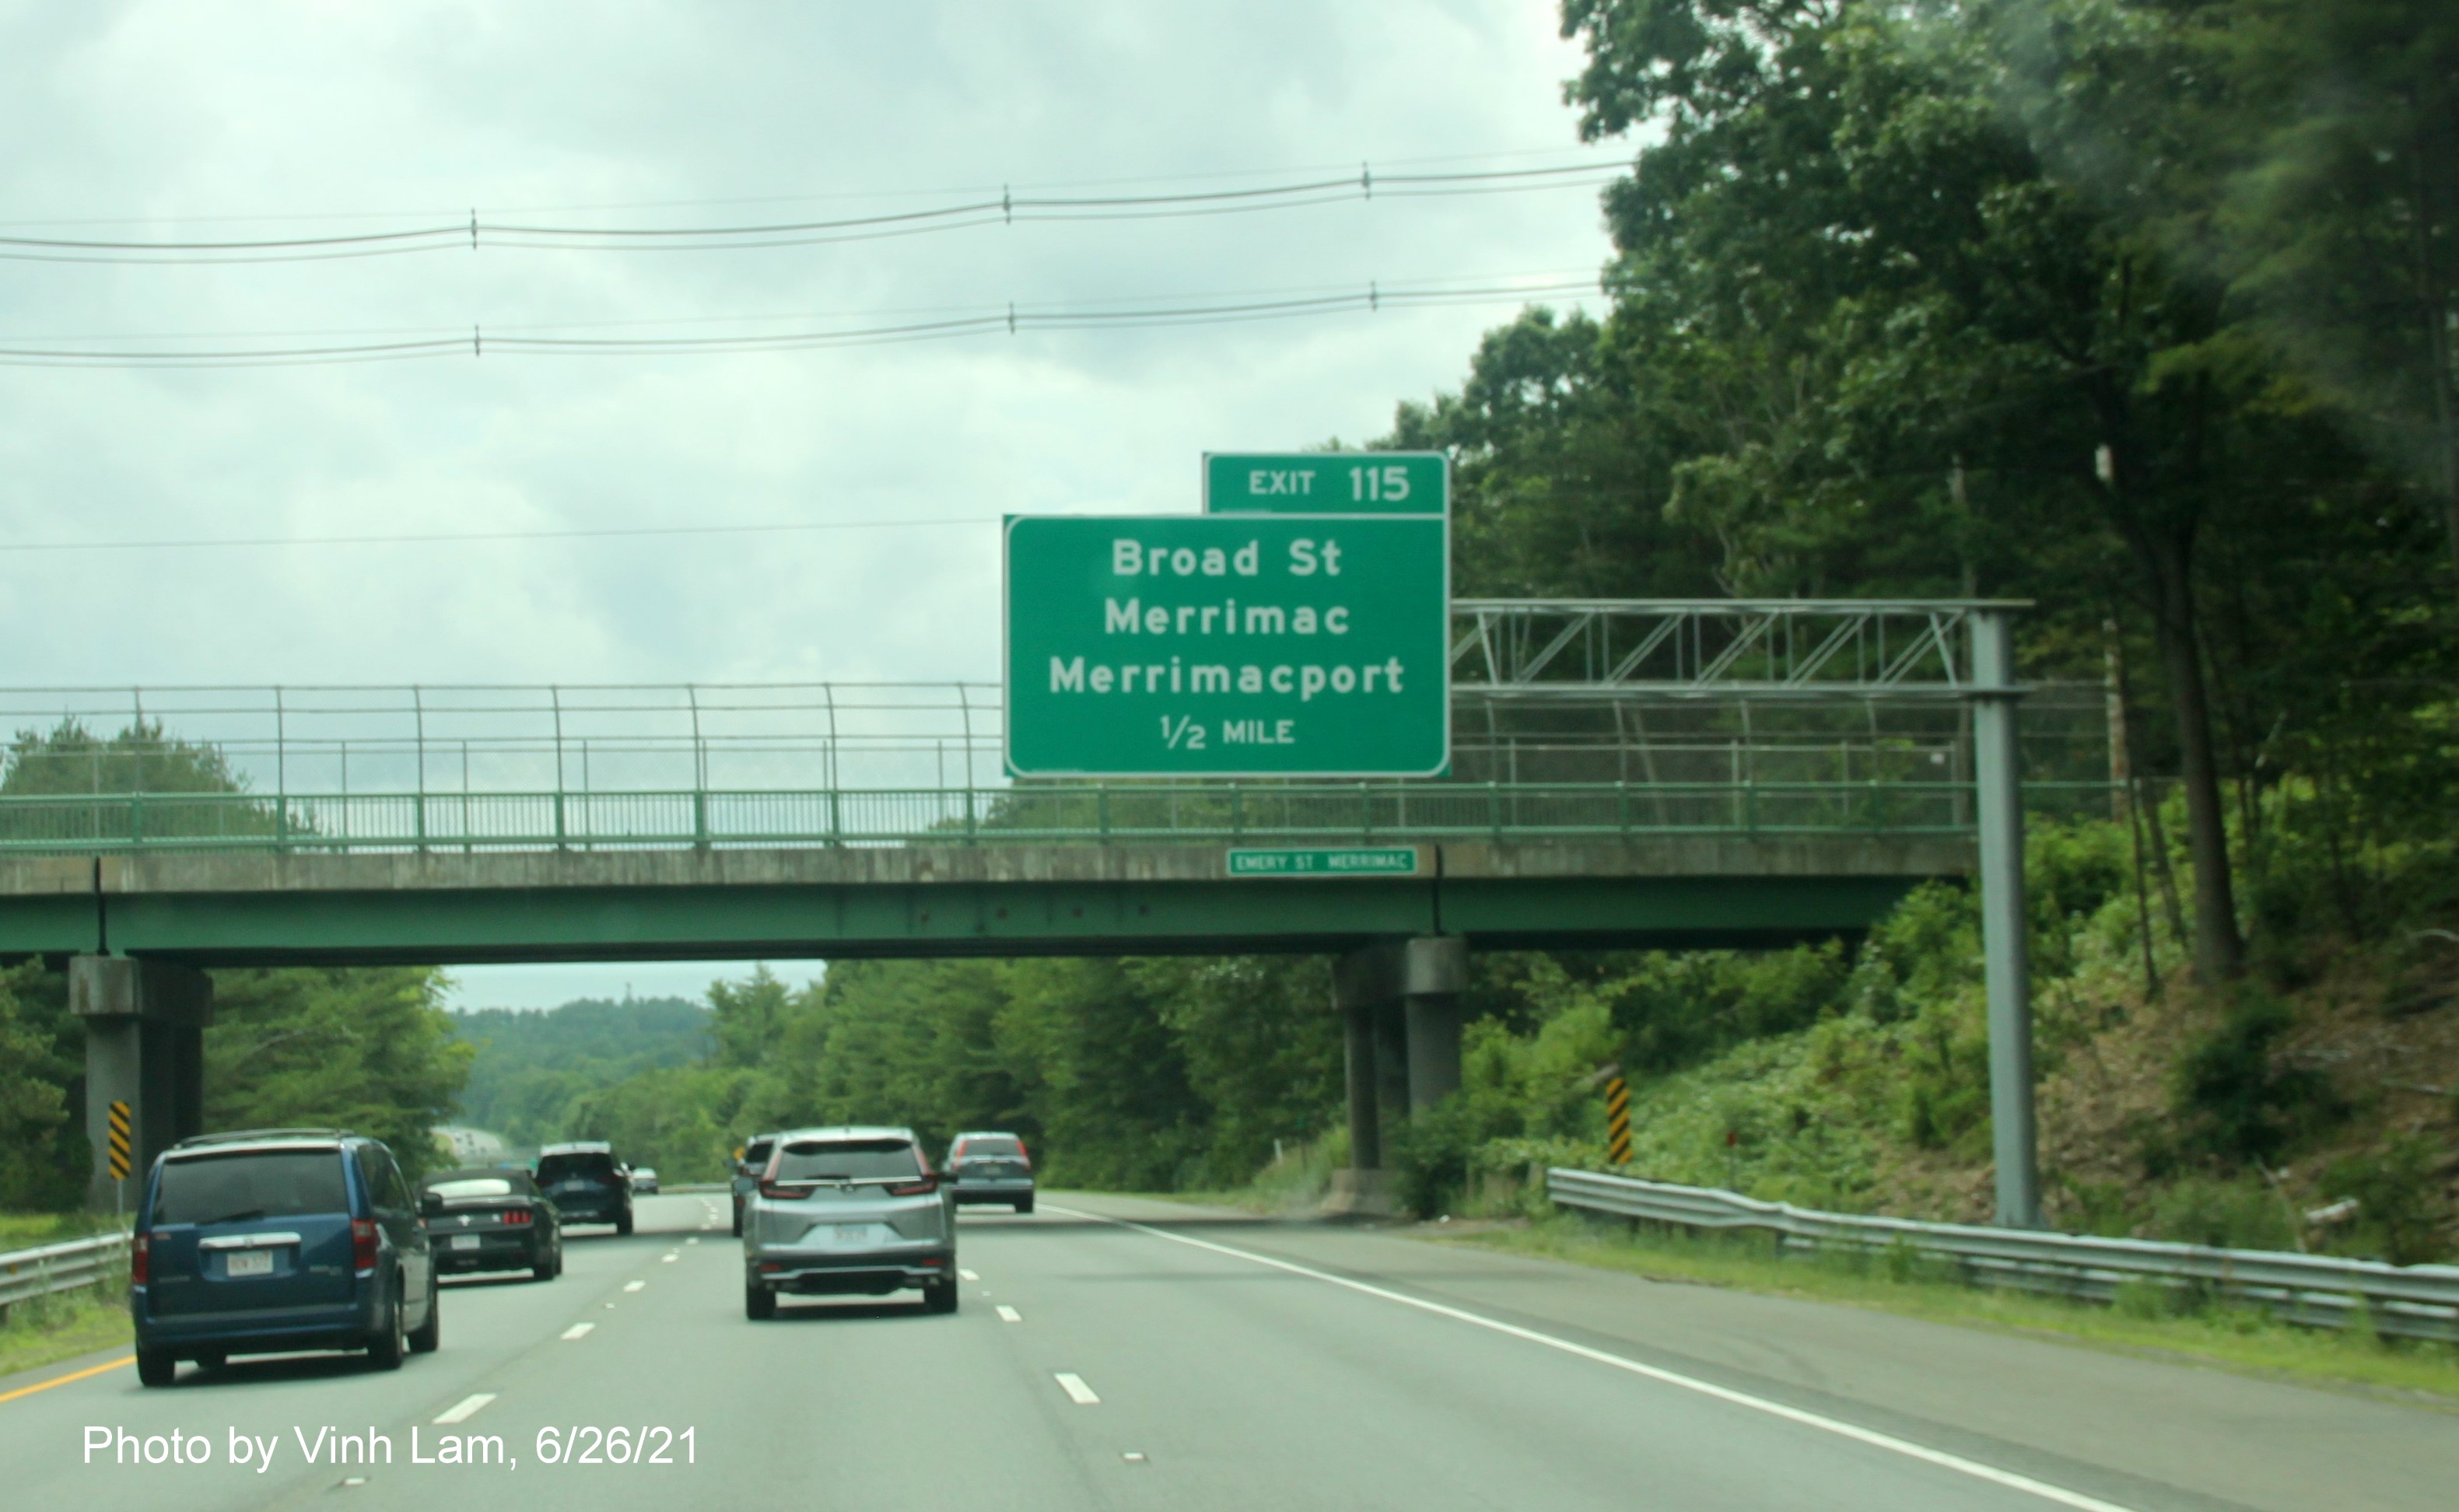 Image of 1/2 mile advance overhead sign for Broad Street exit with new milepost based exit number on I-495 South in Amesbury, photo by Vinh Lam, June 2021